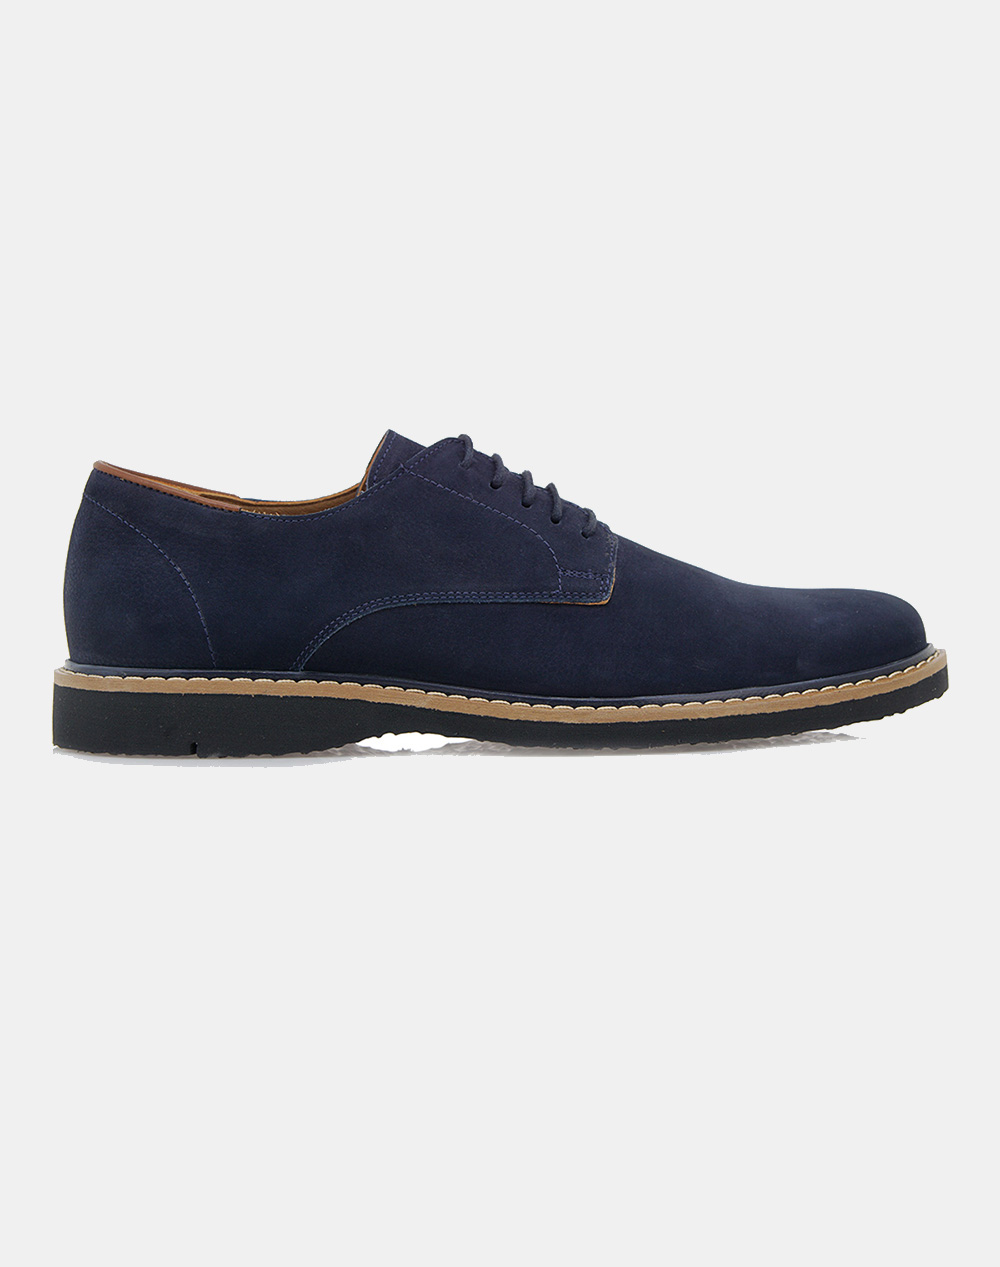 LORENZO RUSSO CASUAL S526S6912053-053 NavyBlue 3820PT-LR6040014_XR21187